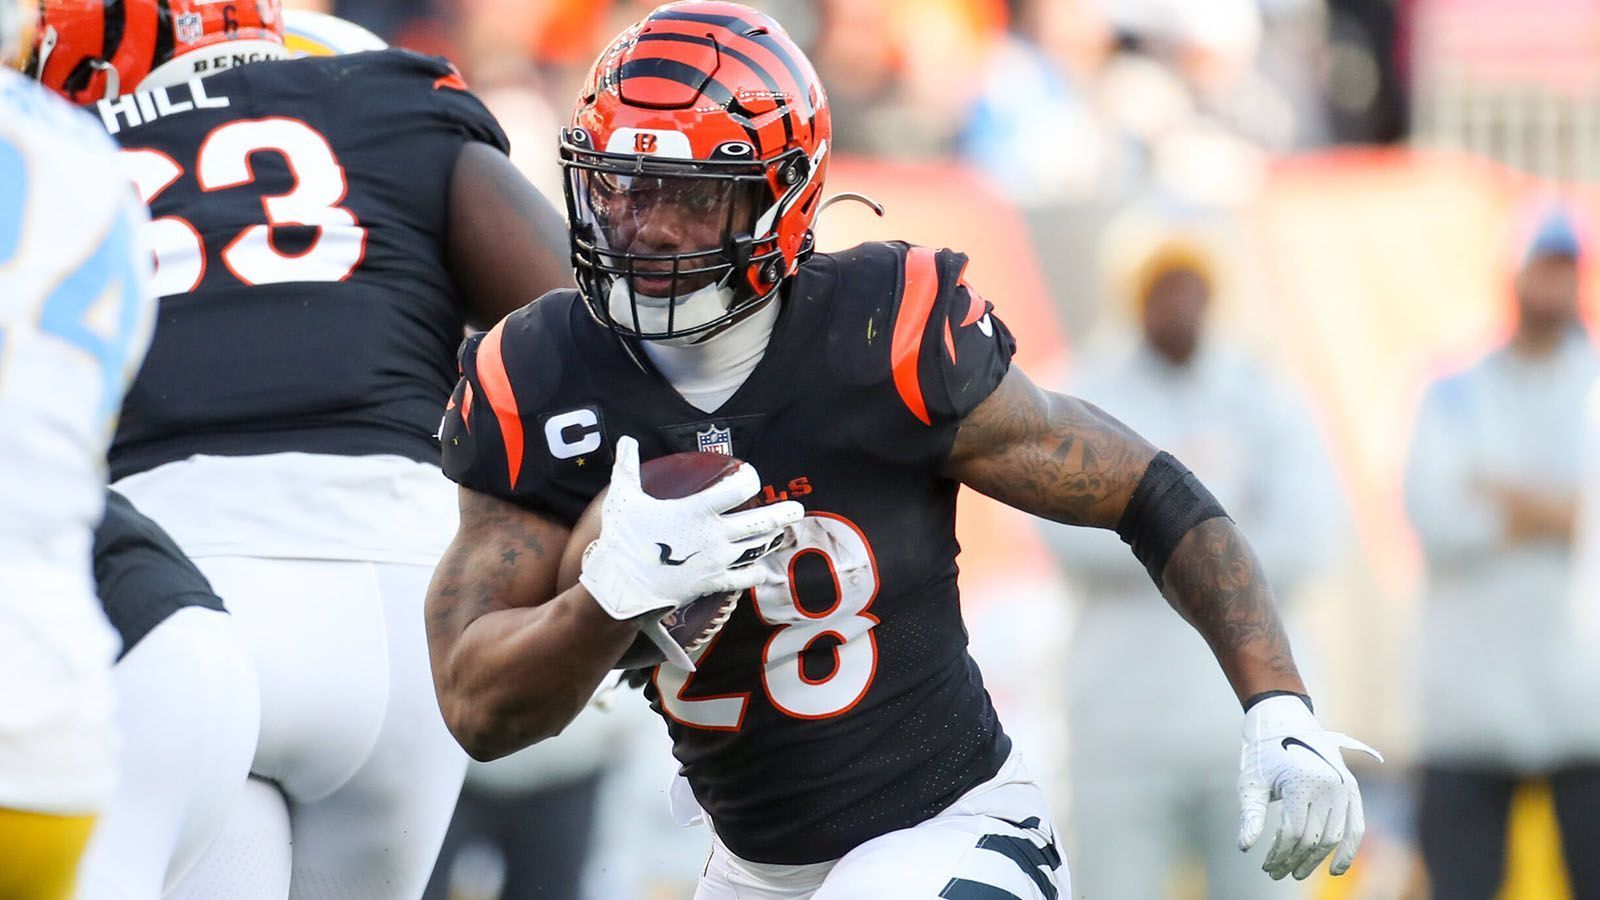 
                <strong>6. Platz: Joe Mixon</strong><br>
                &#x2022; Team: Cincinnati Bengals<br>&#x2022; Position: Running Back<br>&#x2022; <strong>Overall Rating: 93</strong><br>&#x2022; Key Stats: Speed 91 - Acceleration 93 - Agility 91<br>
              